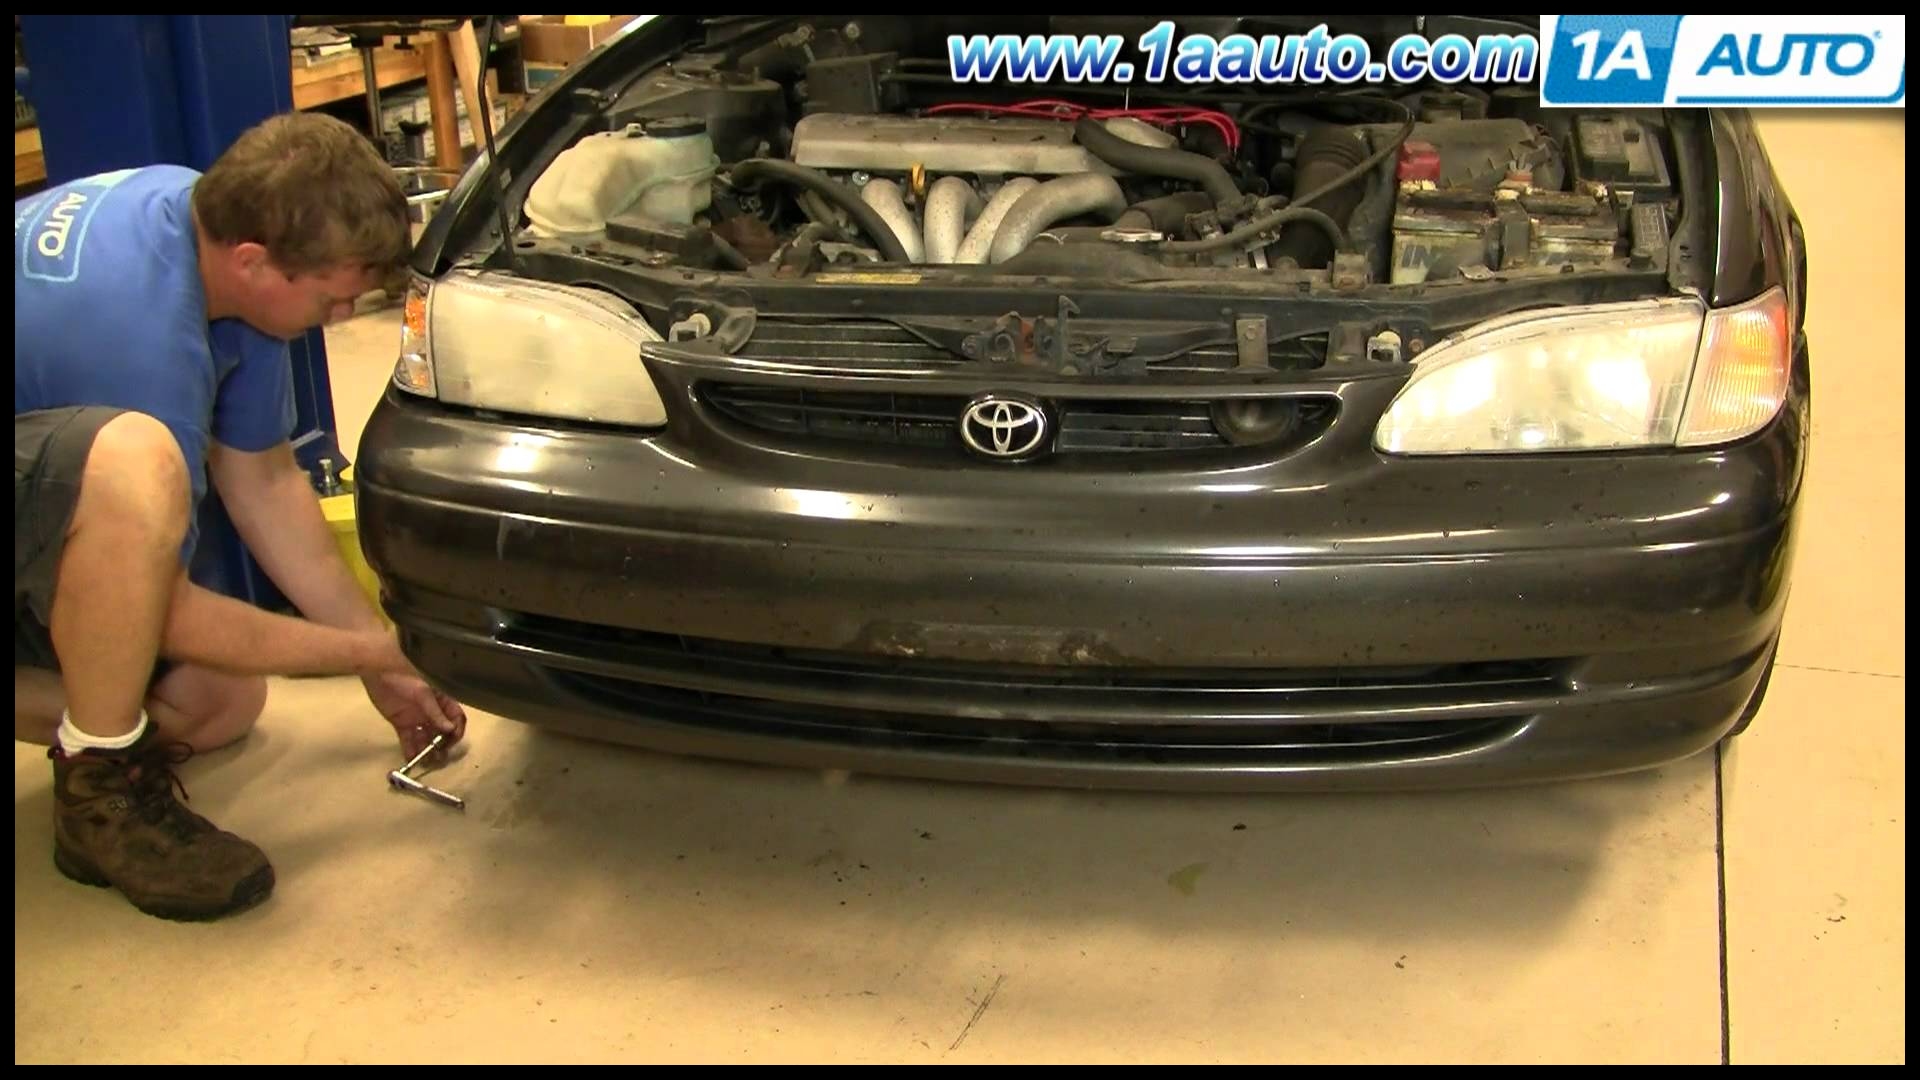 How To Install Replace Headlight and Bulb Toyota Corolla 98 02 1AAuto – Social Media Video Network Trends